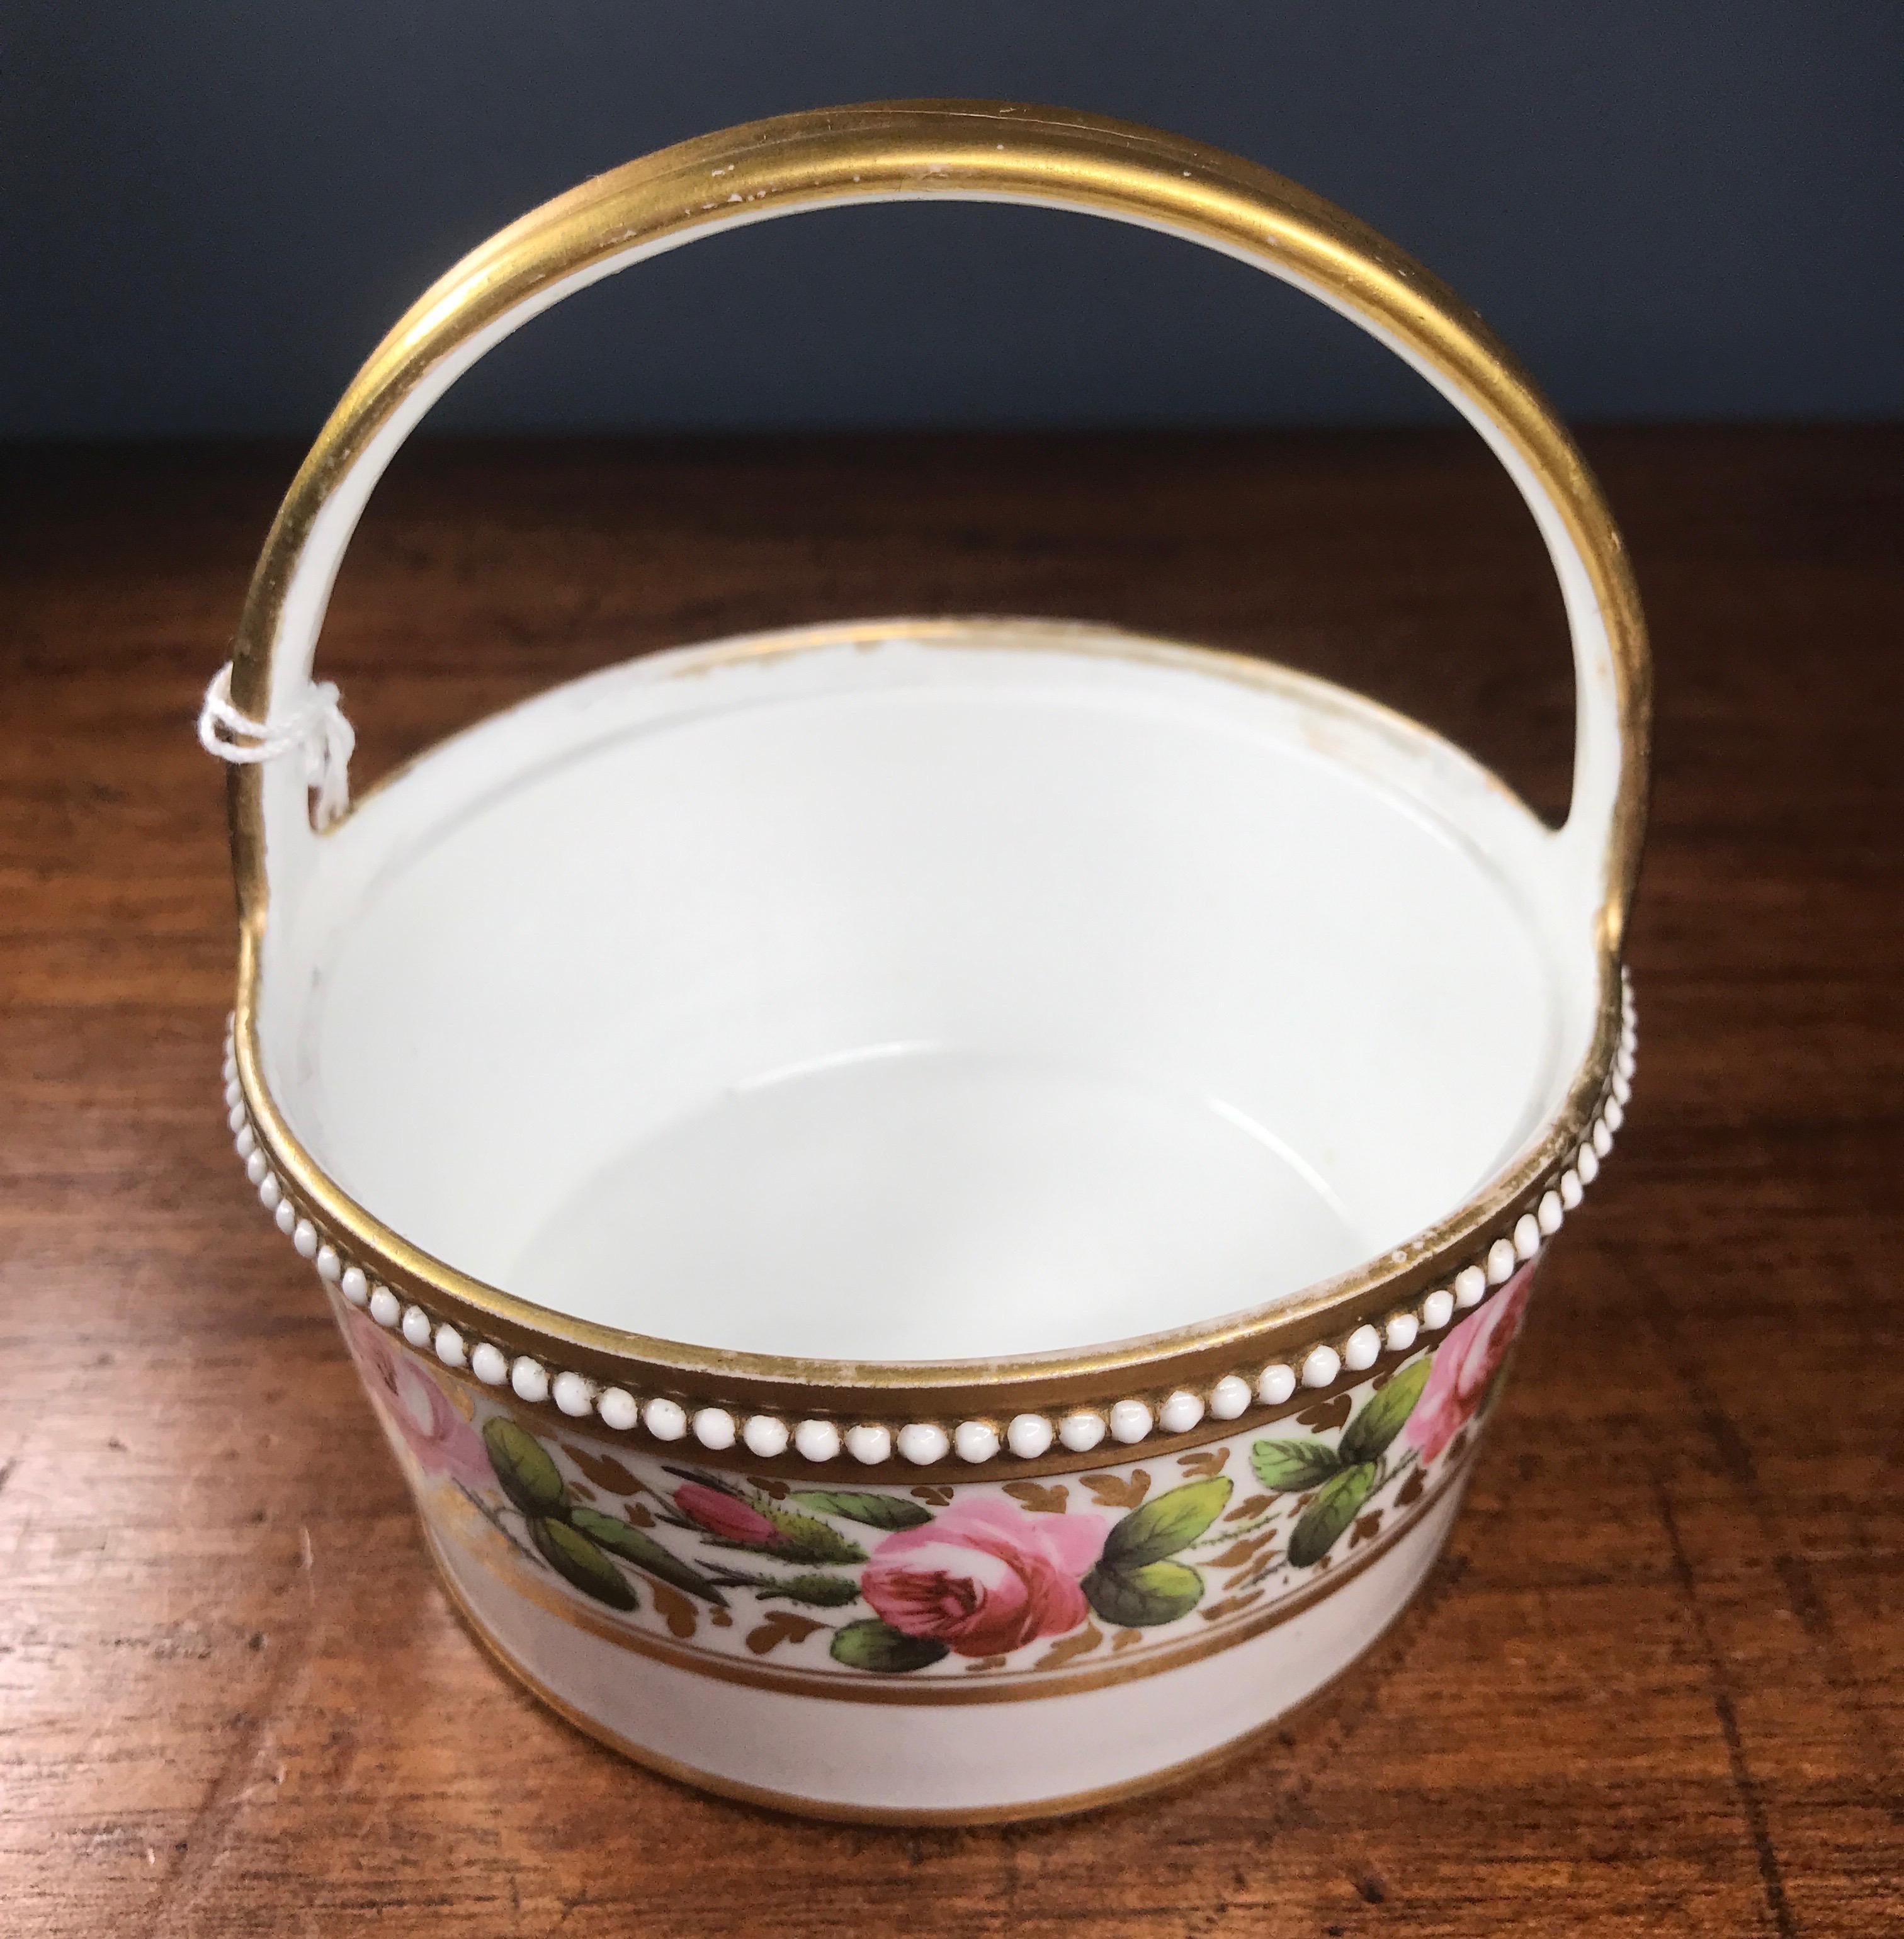 Porcelain Potpourri Basket Painted with Roses, Attr. Davenport, c. 1830 In Fair Condition For Sale In Geelong, Victoria